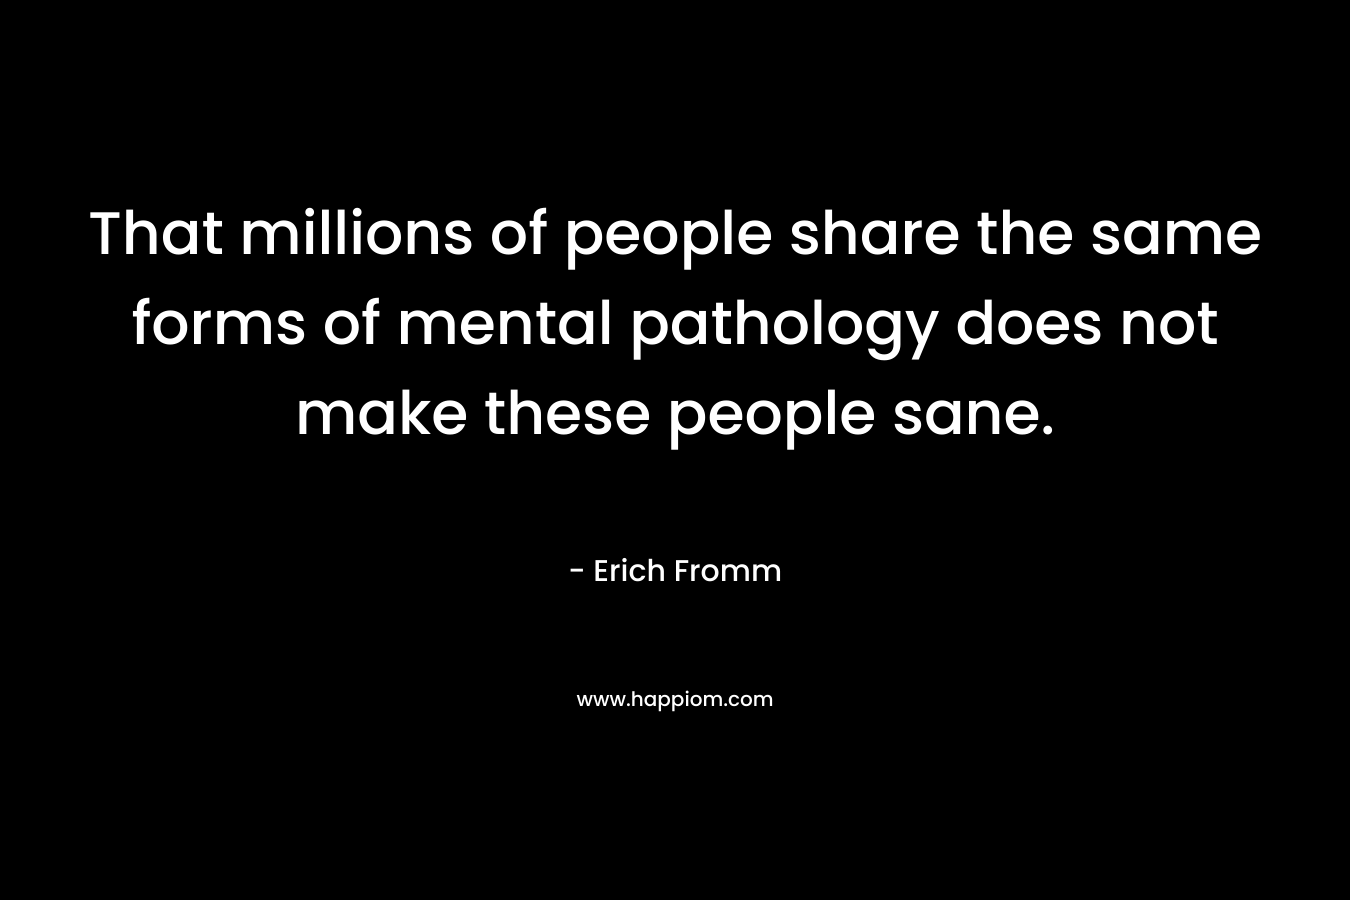 That millions of people share the same forms of mental pathology does not make these people sane.